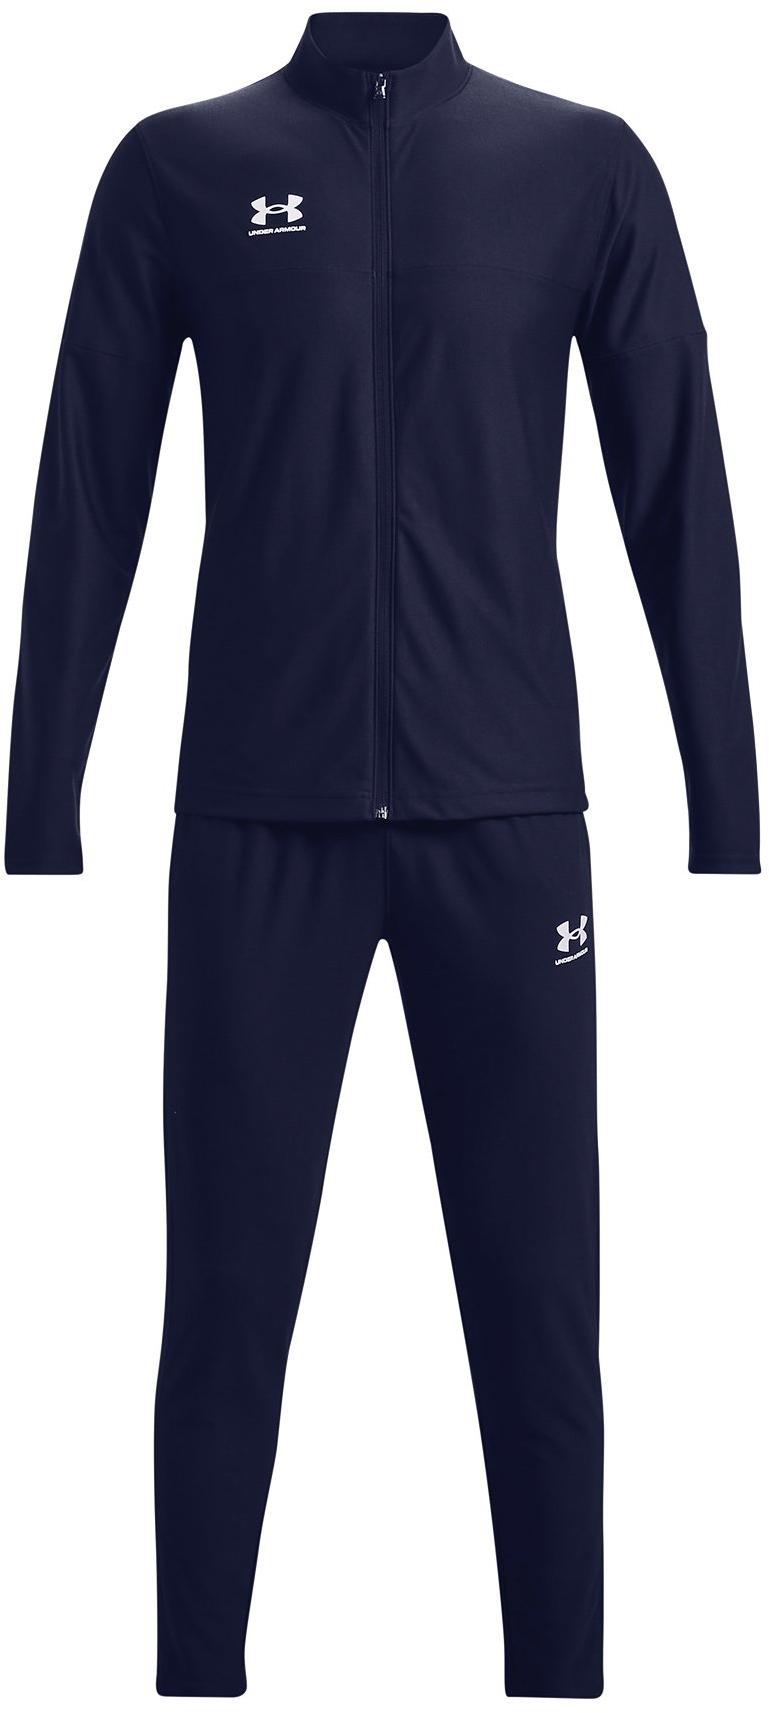 Under Armour Challenger Tracksuit-NVY XL